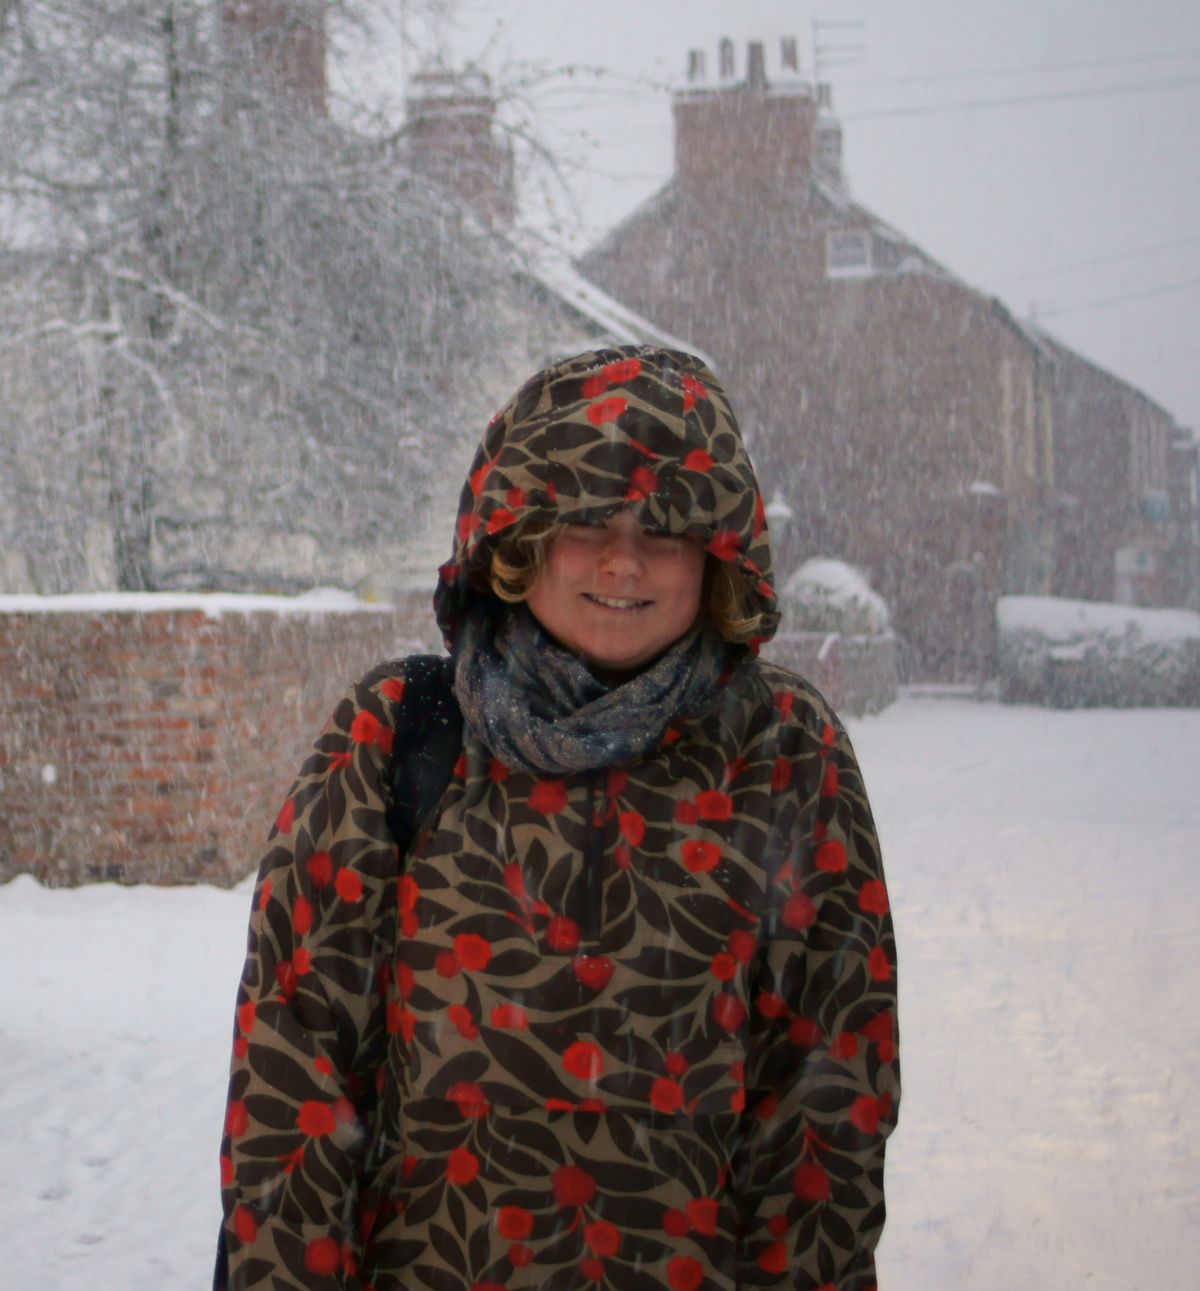 How to look as if you are enjoying the snowy weather.  Paul Haines